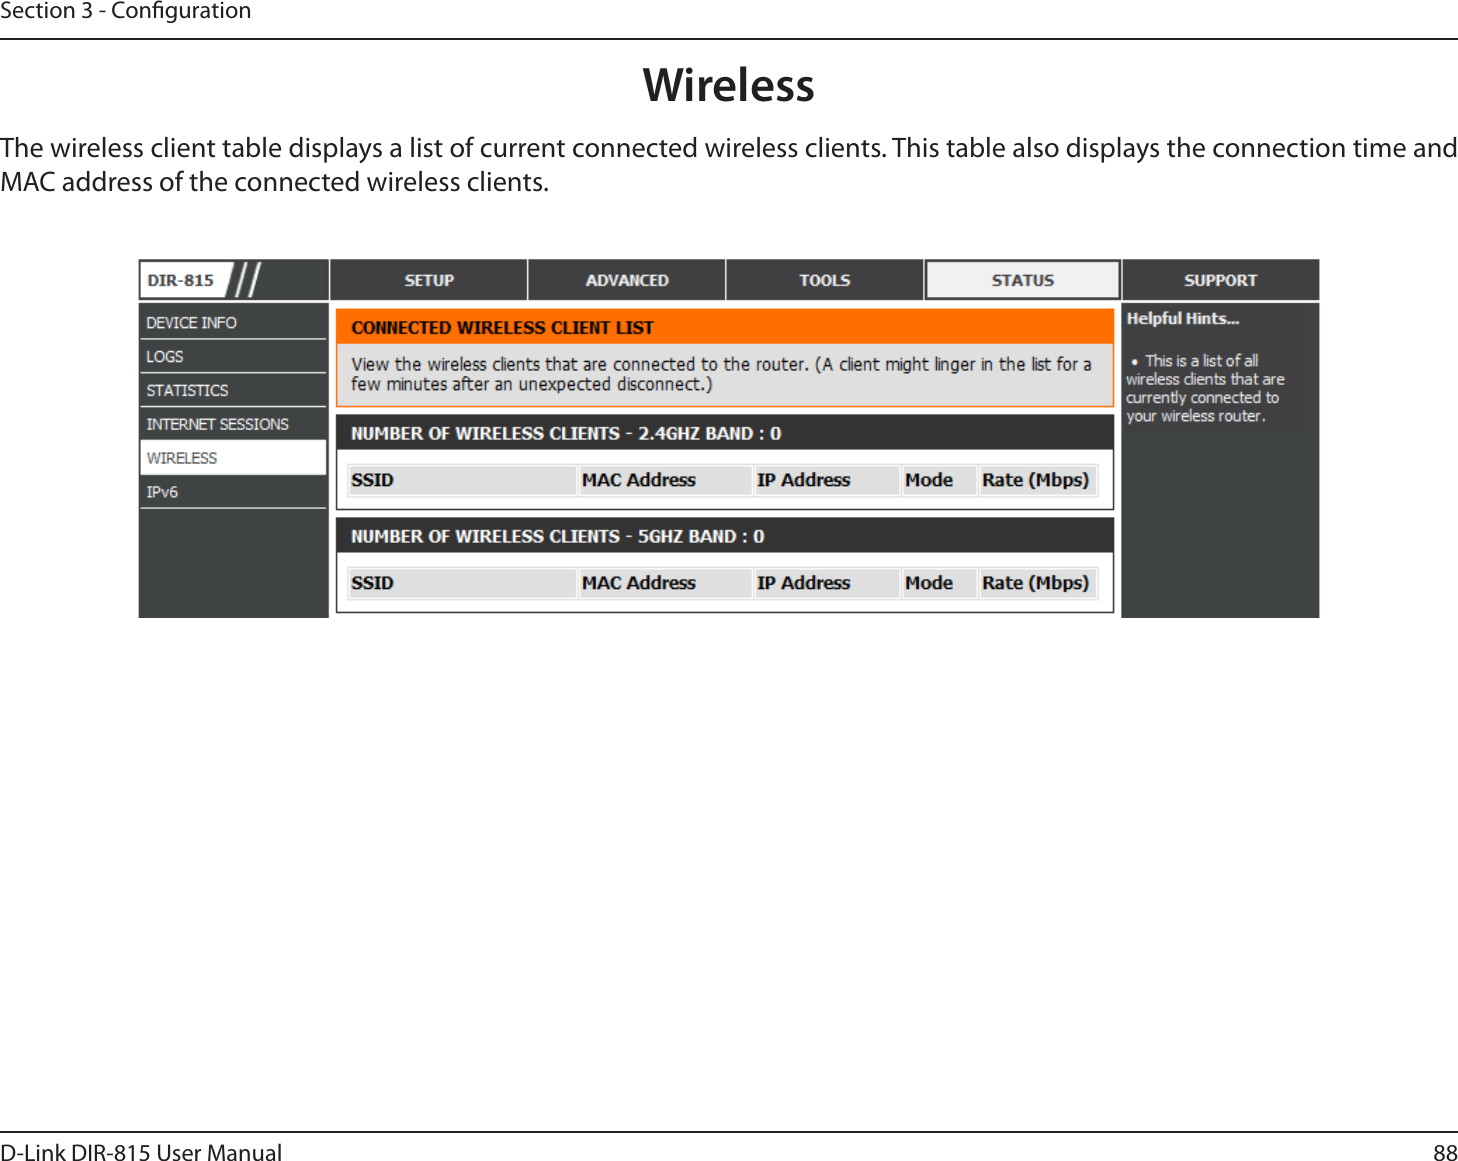 88D-Link DIR-815 User ManualSection 3 - CongurationThe wireless client table displays a list of current connected wireless clients. This table also displays the connection time and MAC address of the connected wireless clients.Wireless